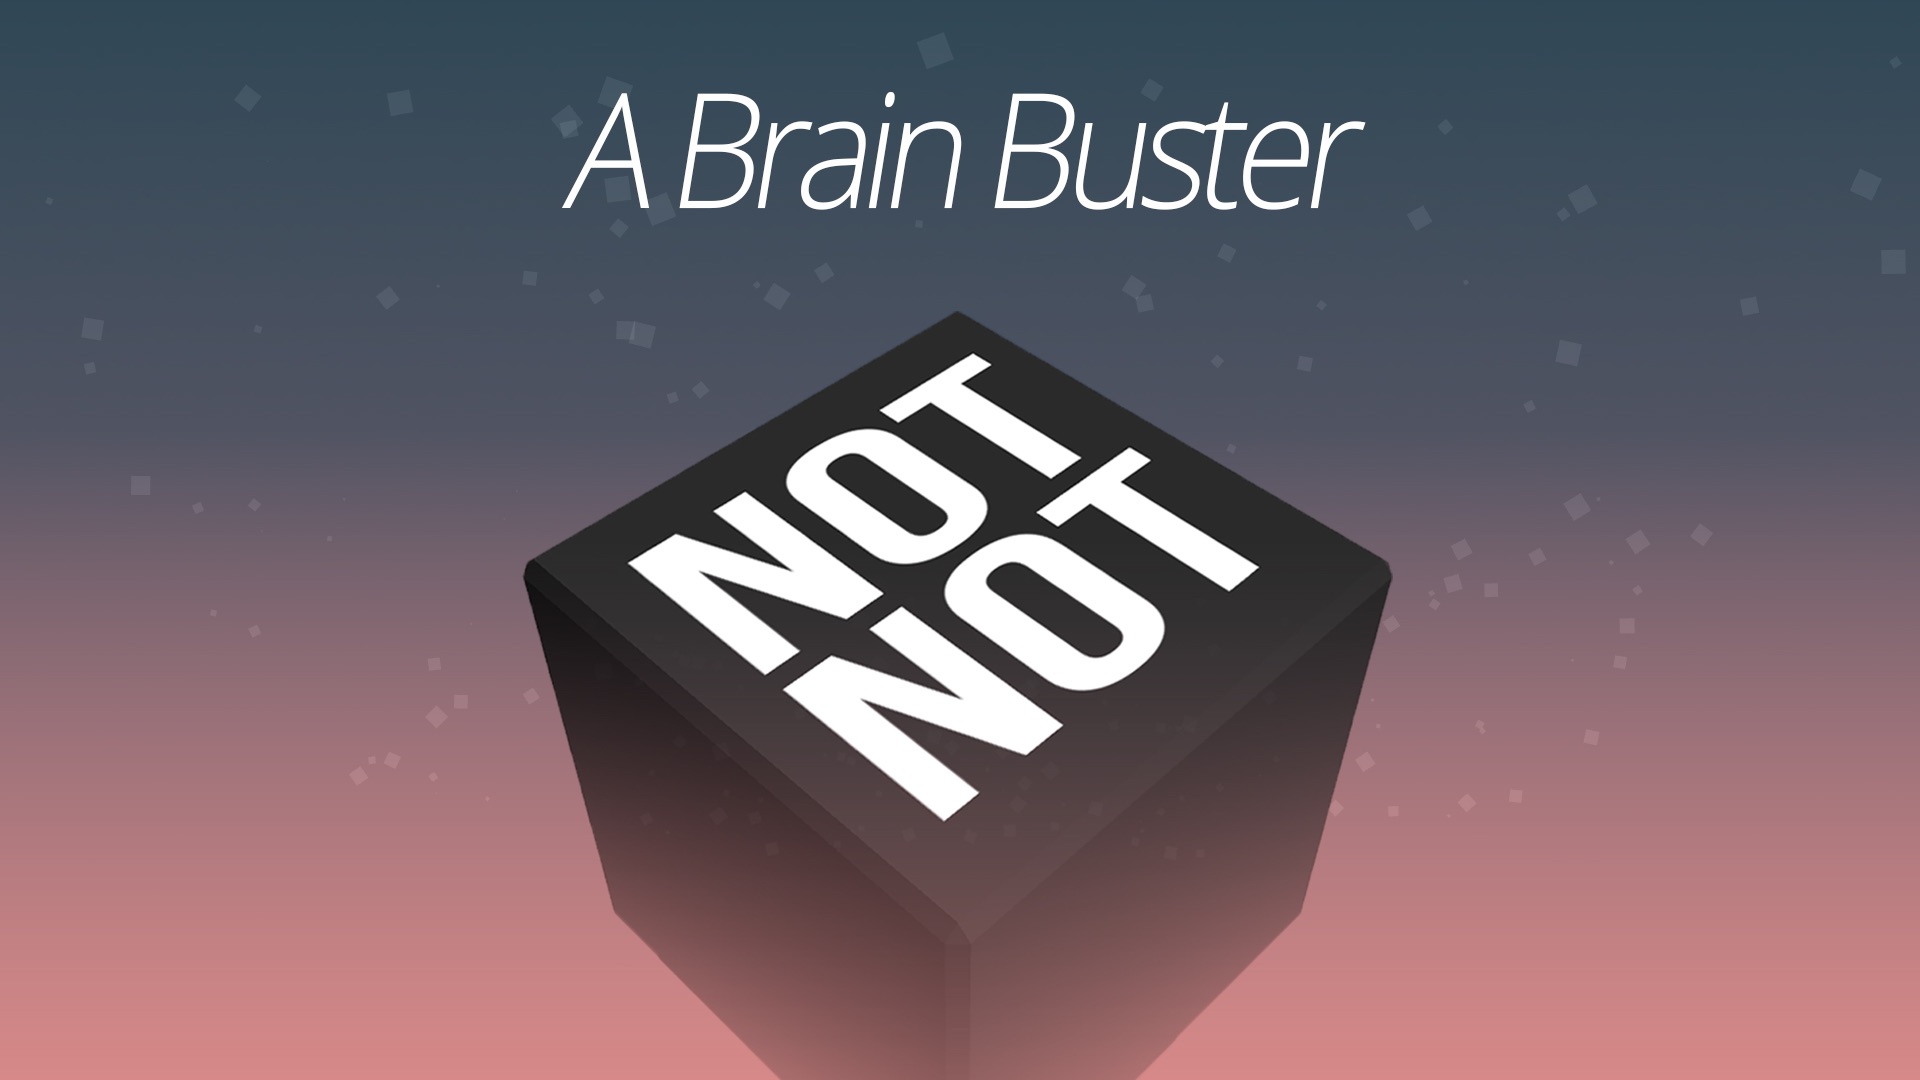 Not Not - A Brain Buster for Nintendo Switch - Nintendo Game Details 大脑破坏者